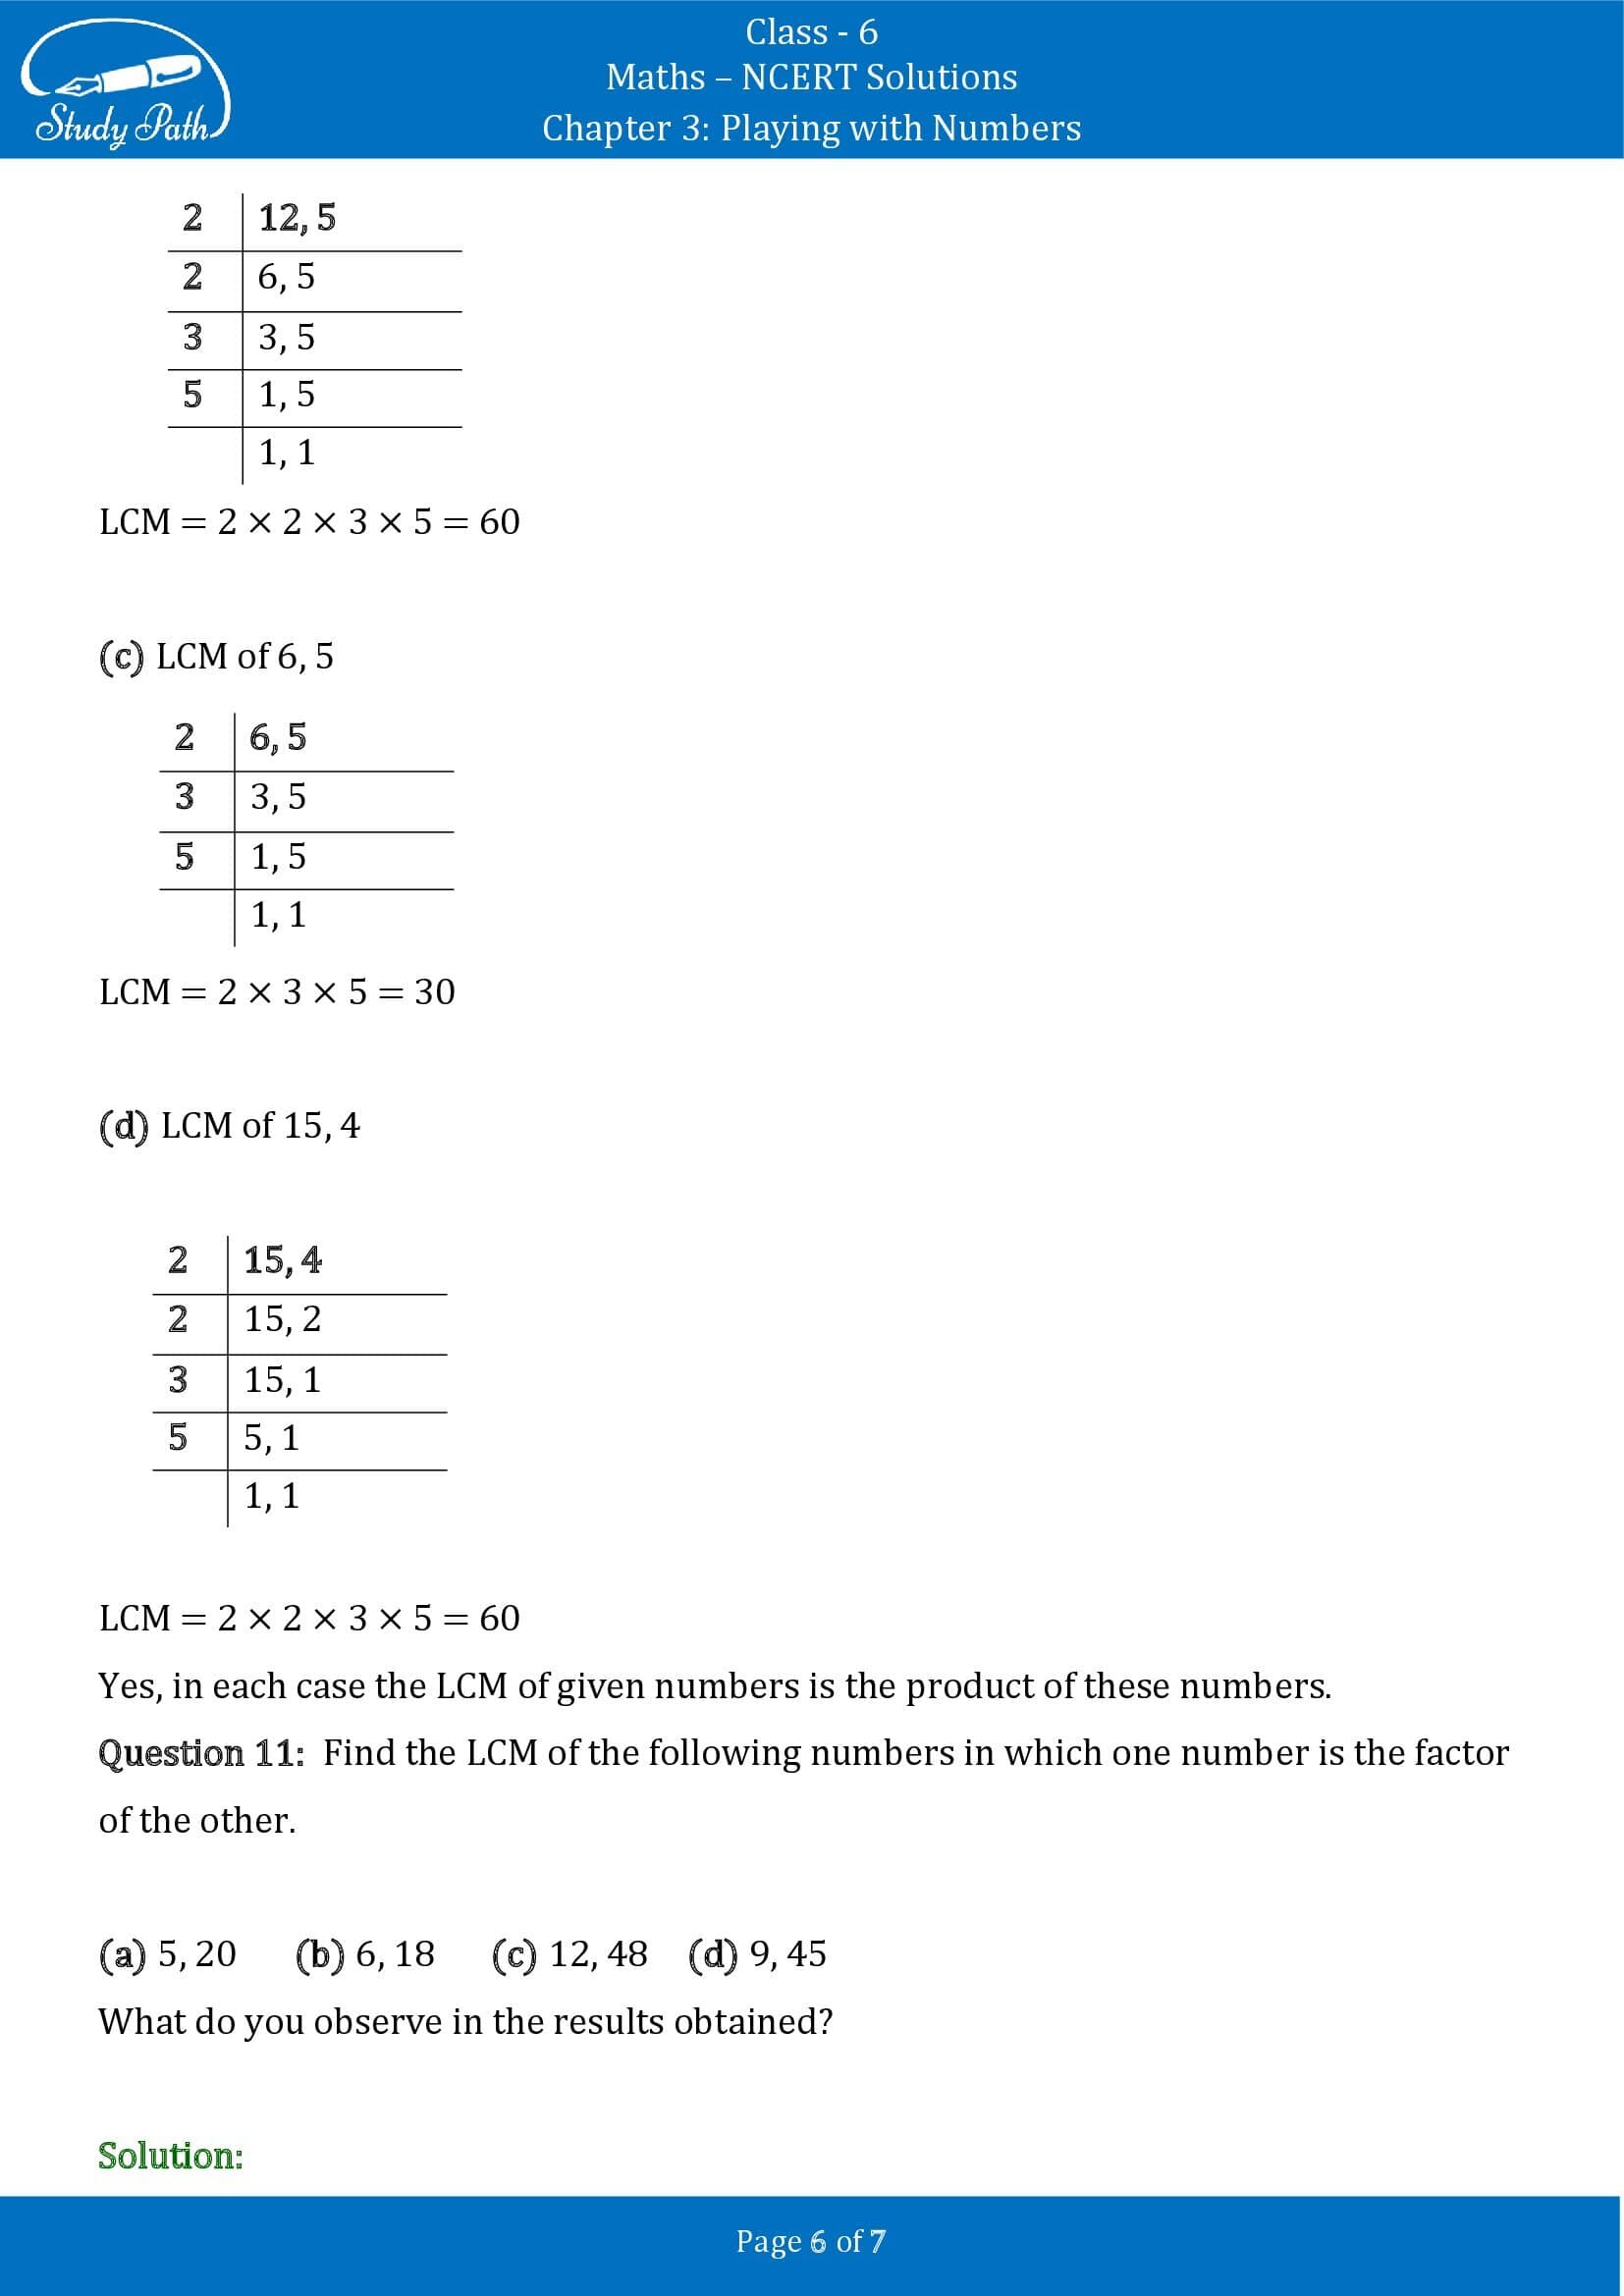 NCERT Solutions for Class 6 Maths Chapter 3 Playing with Numbers Exercise 3.7 00006